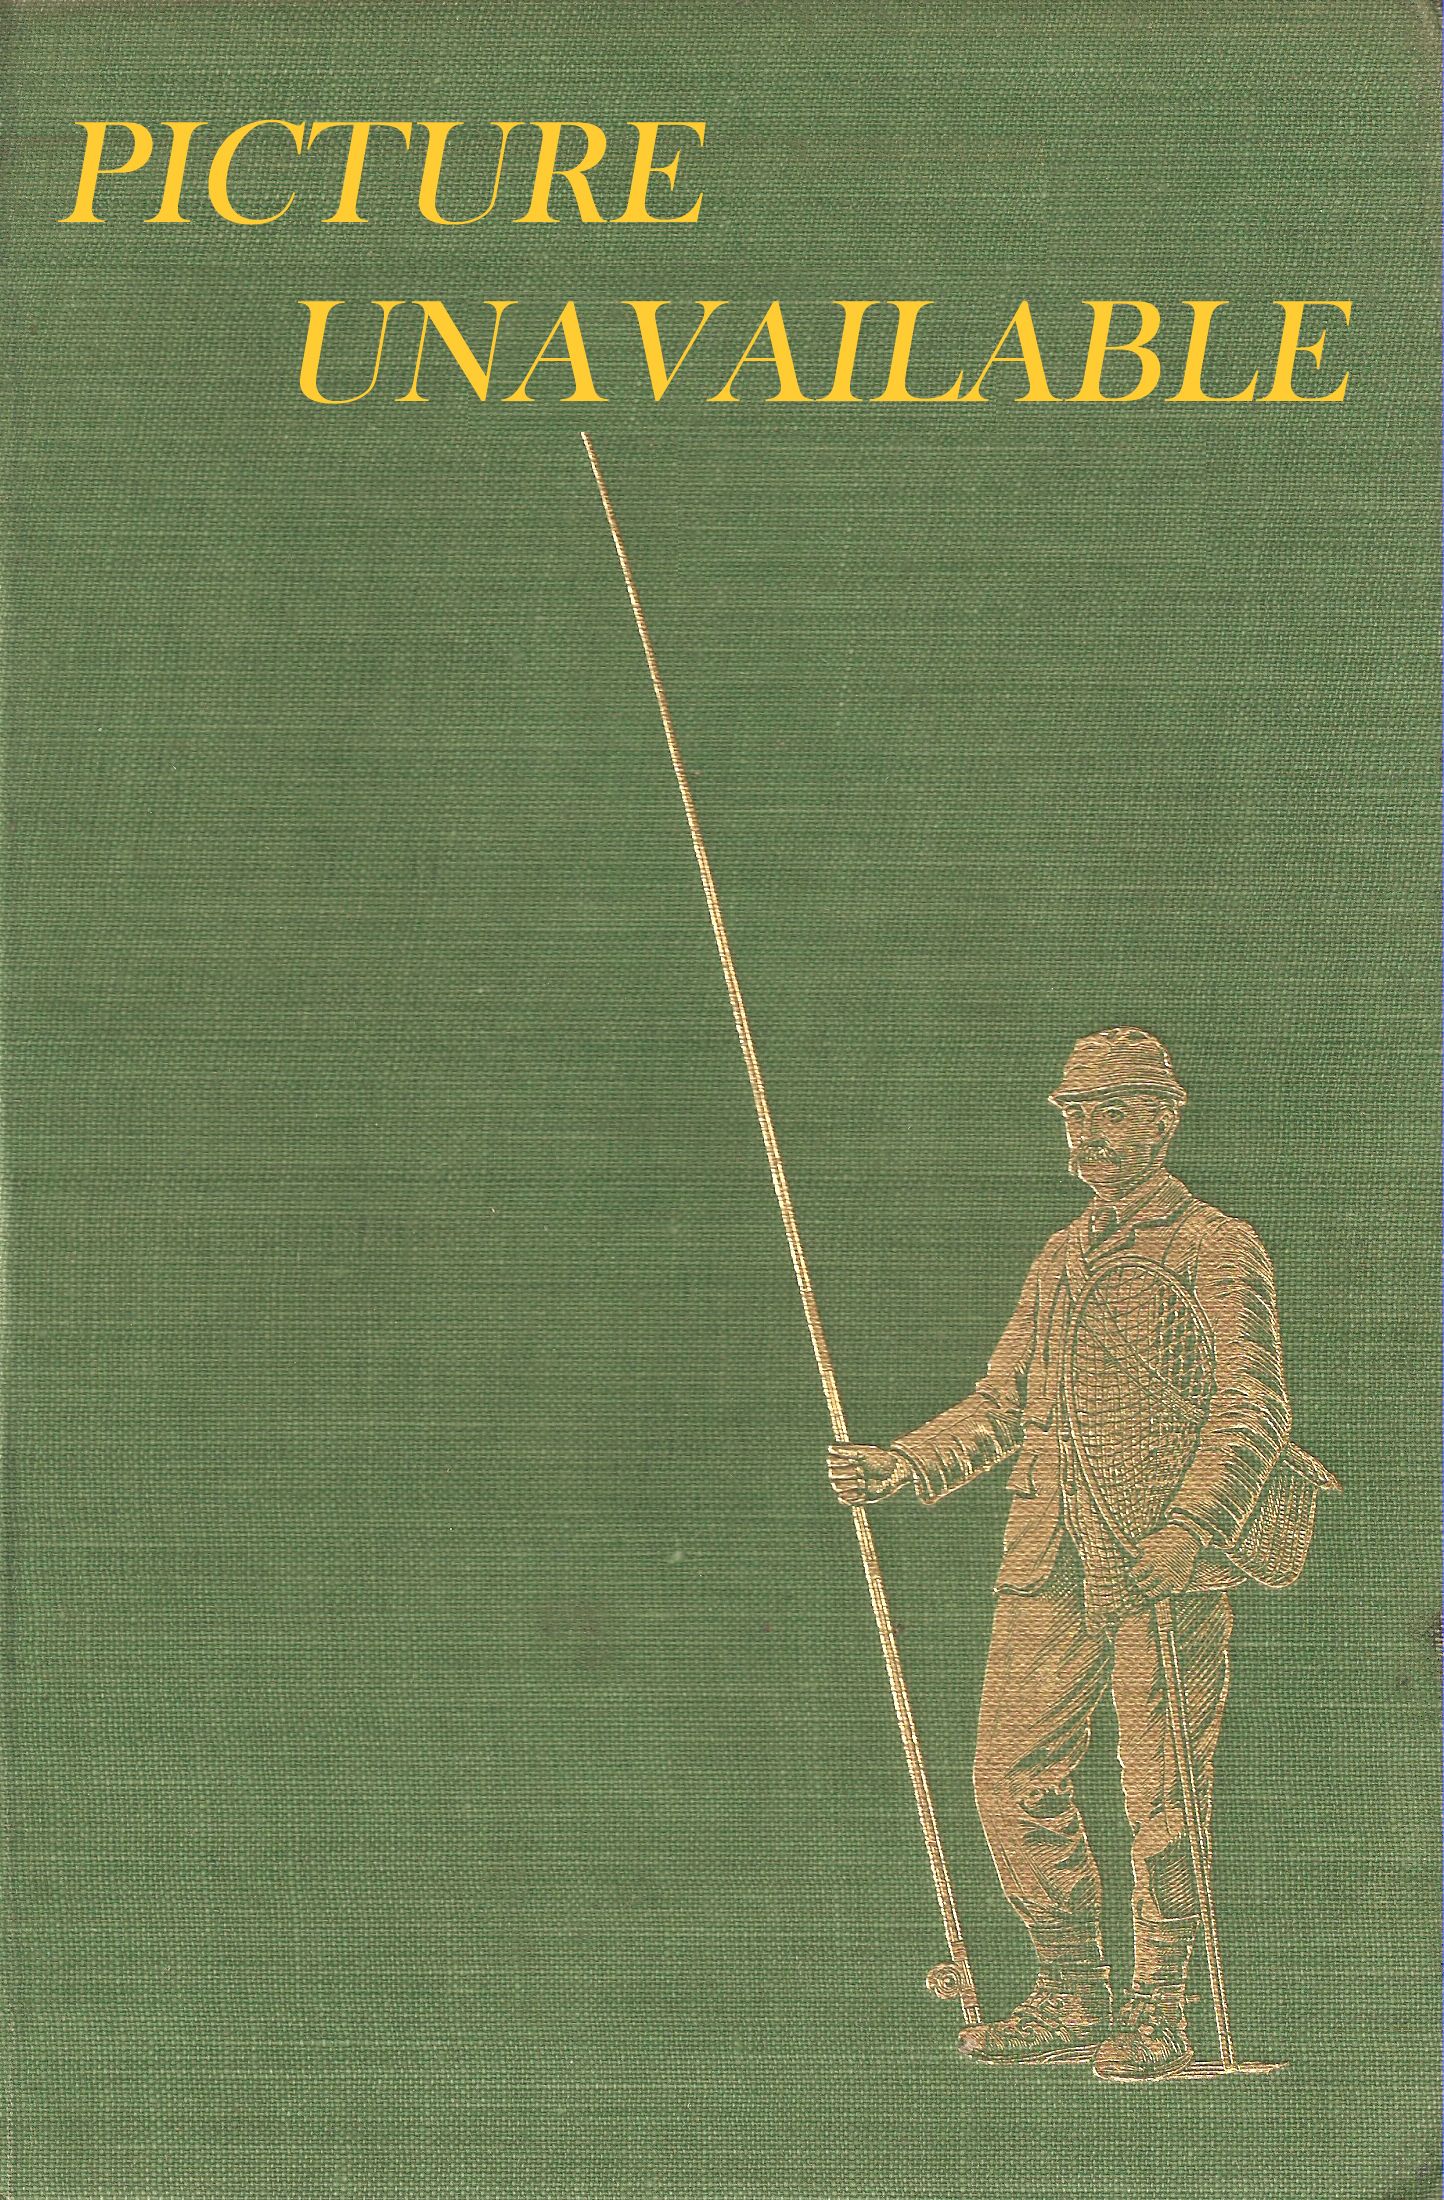 THE HISTORY OF FLY FISHING. VOLUME TWO: TROUT FLY PATTERNS 1496-1916. By  Andrew Herd.